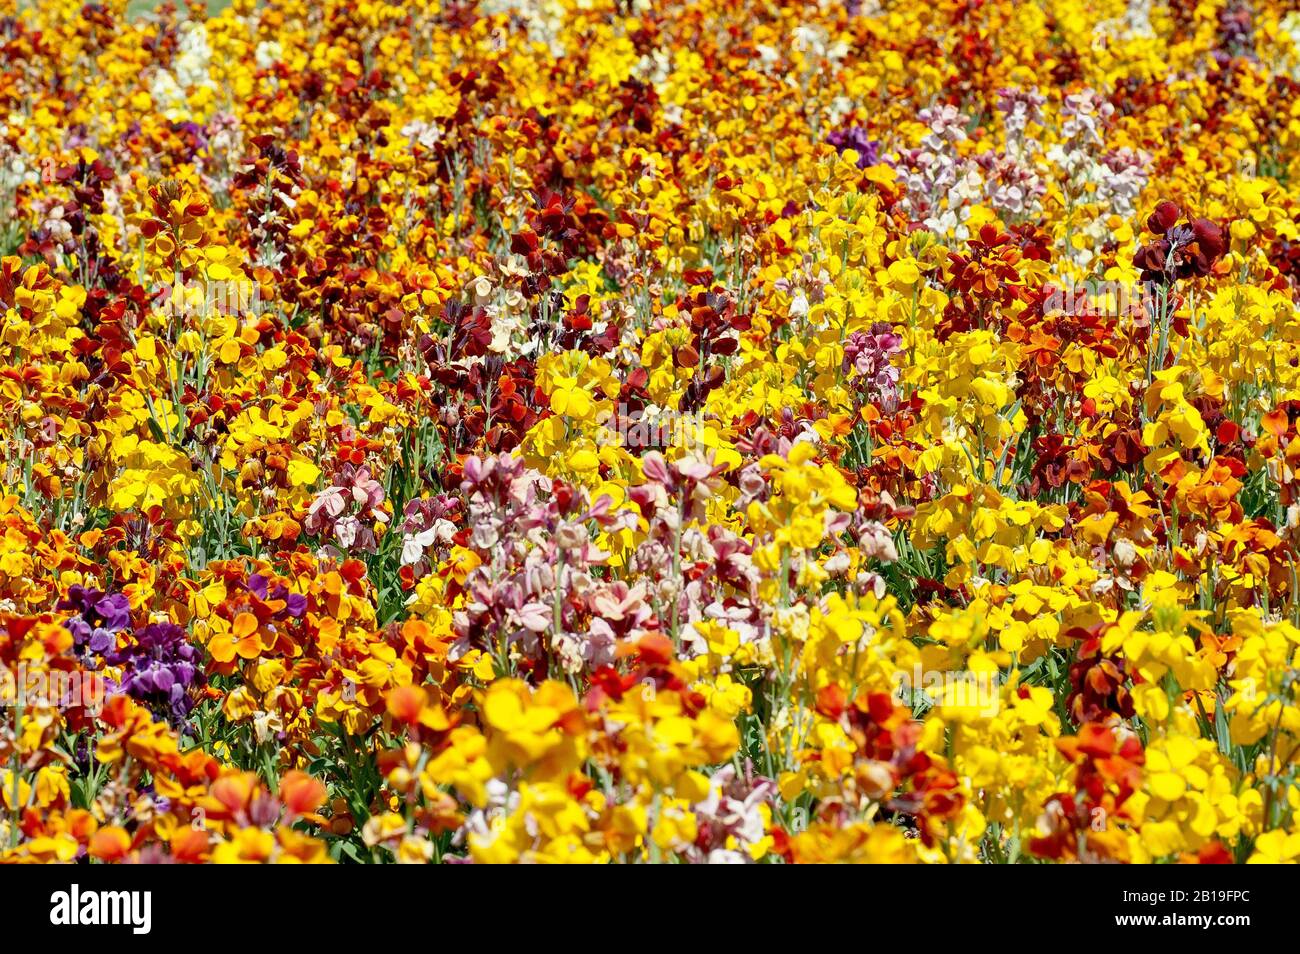 A colourful abstract image of the various varieties of Cheiranthus and Erysimum flowers growing in a council maintained flowerbed. Stock Photo